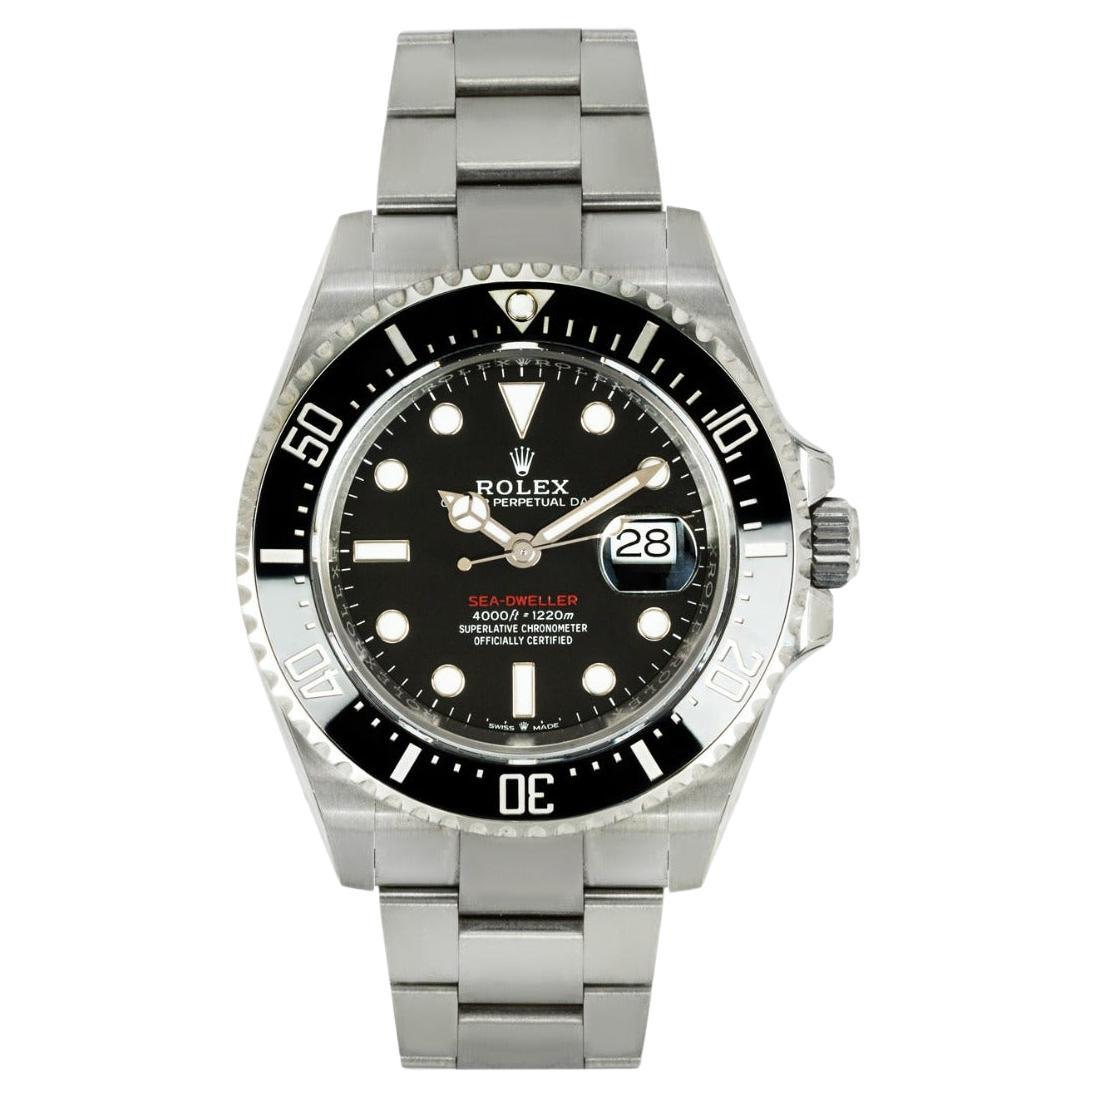 Rolex Sea-Dweller Red Writing 126600 For Sale